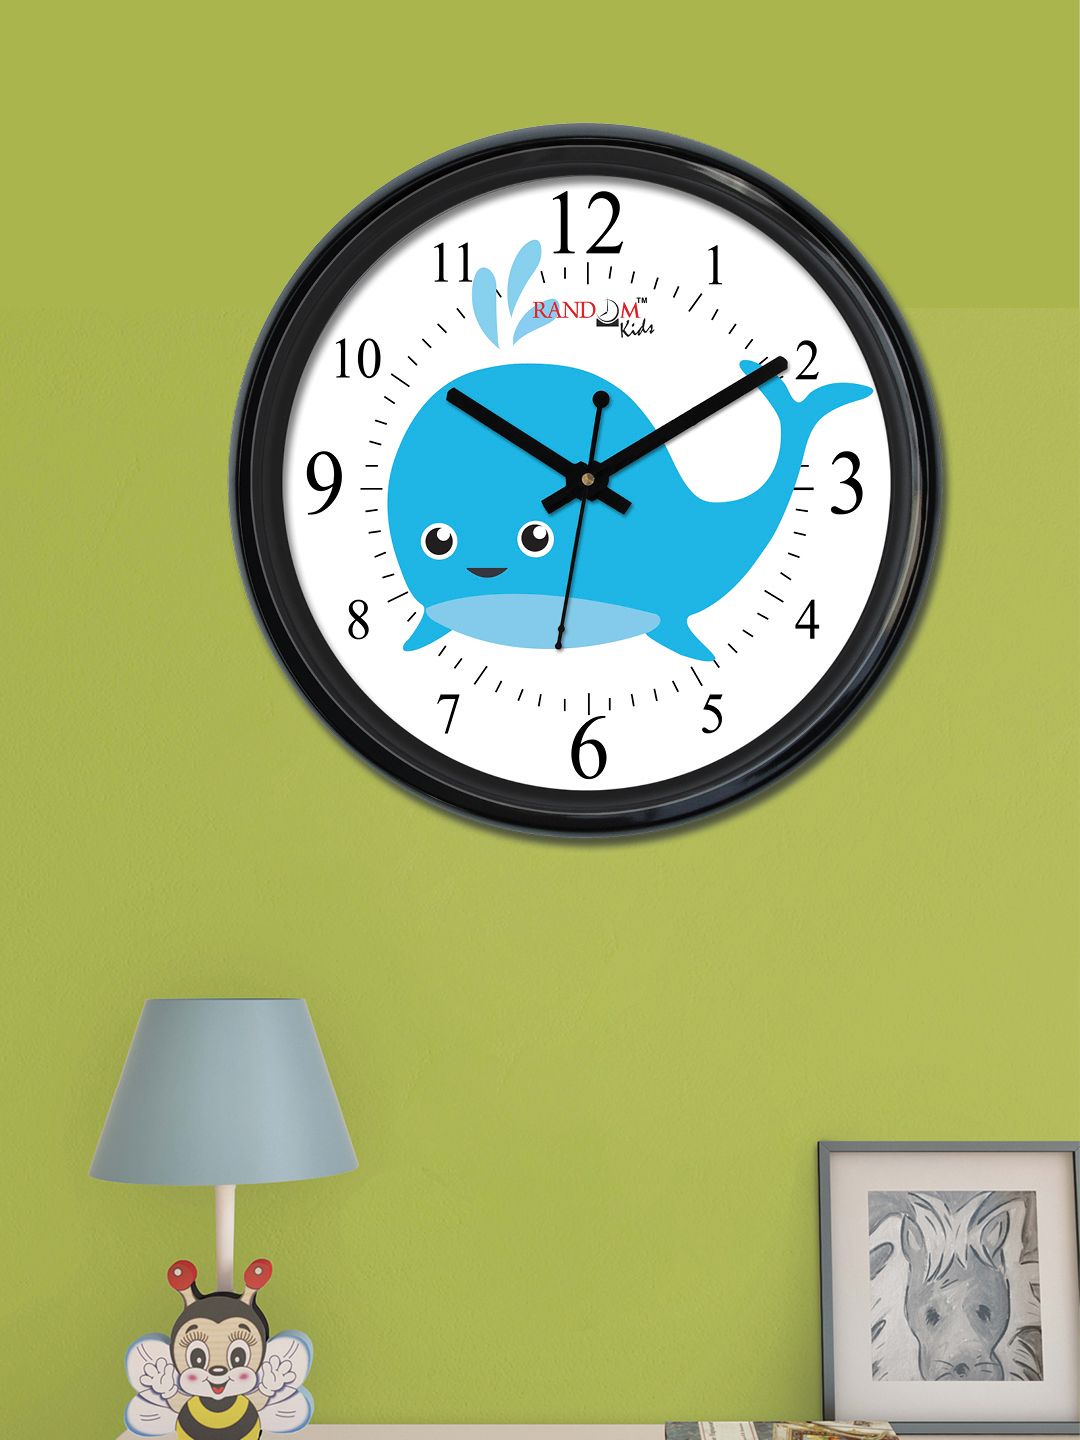 RANDOM Off-White & Turquoise Blue Round Printed 30 cm Analogue Wall Clock Price in India